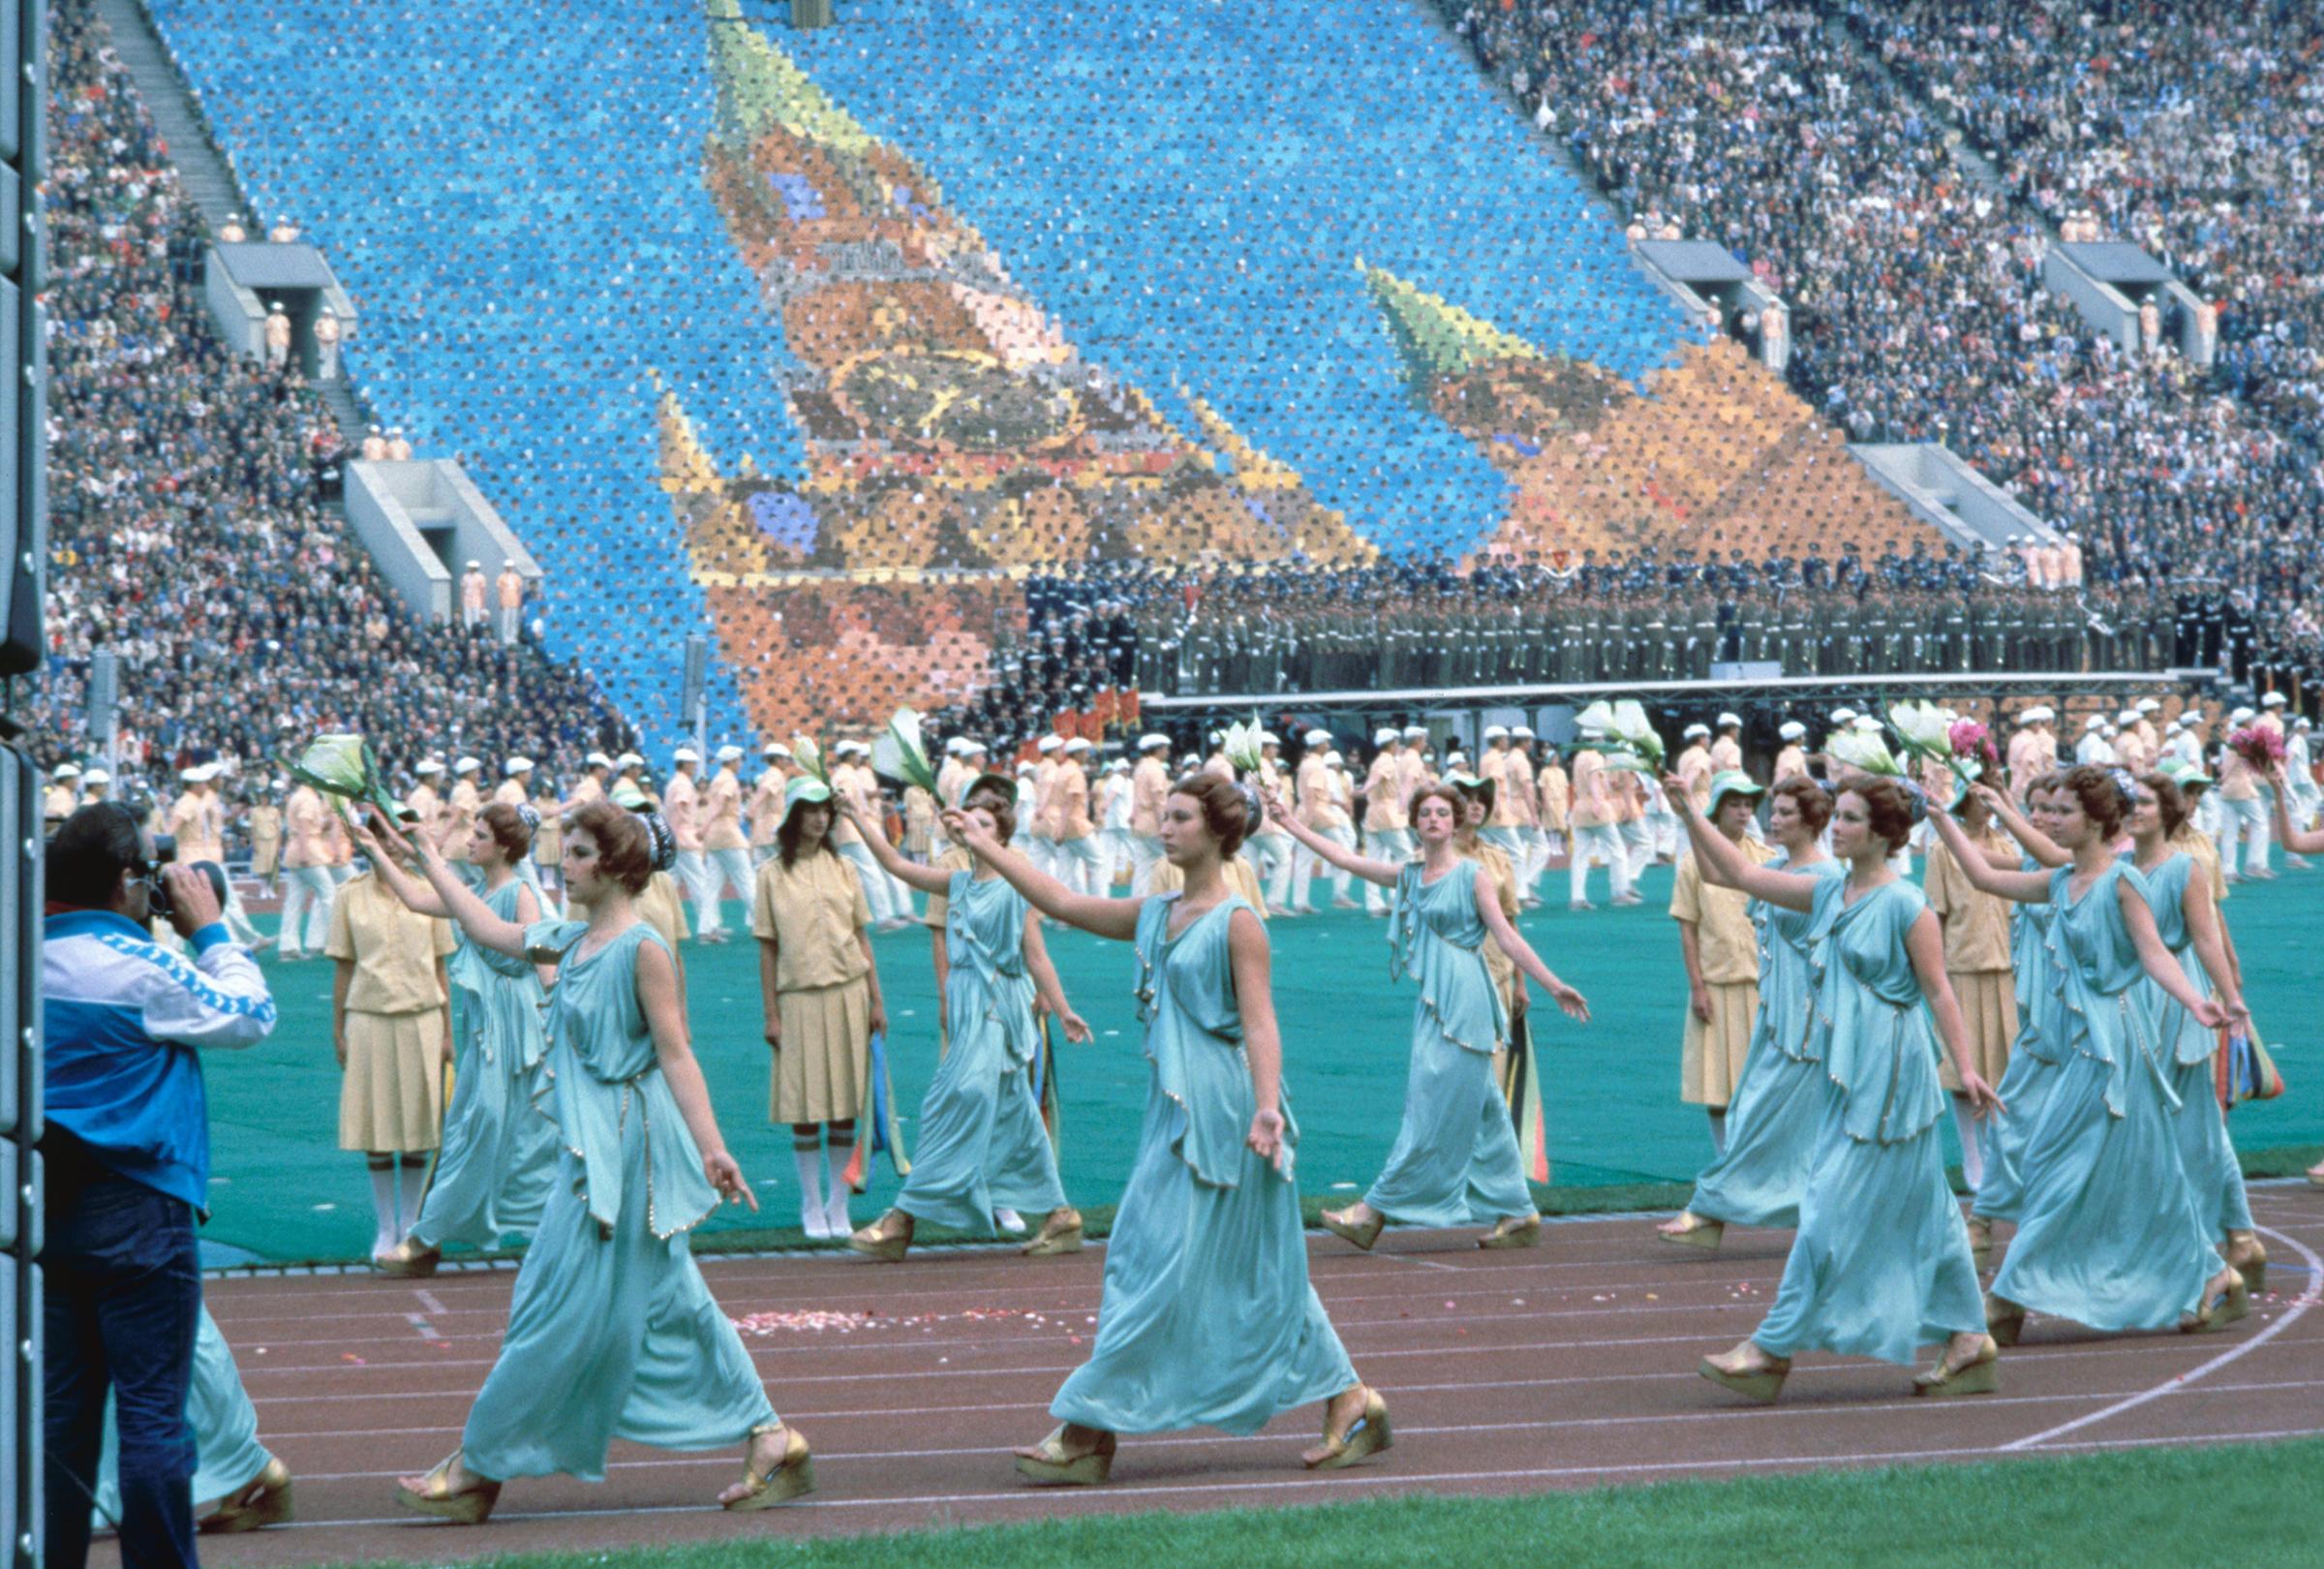 Moscow, 1980Women dressed in Greek costumes form a procession in front of a human mosaic depicting the Kremlin.